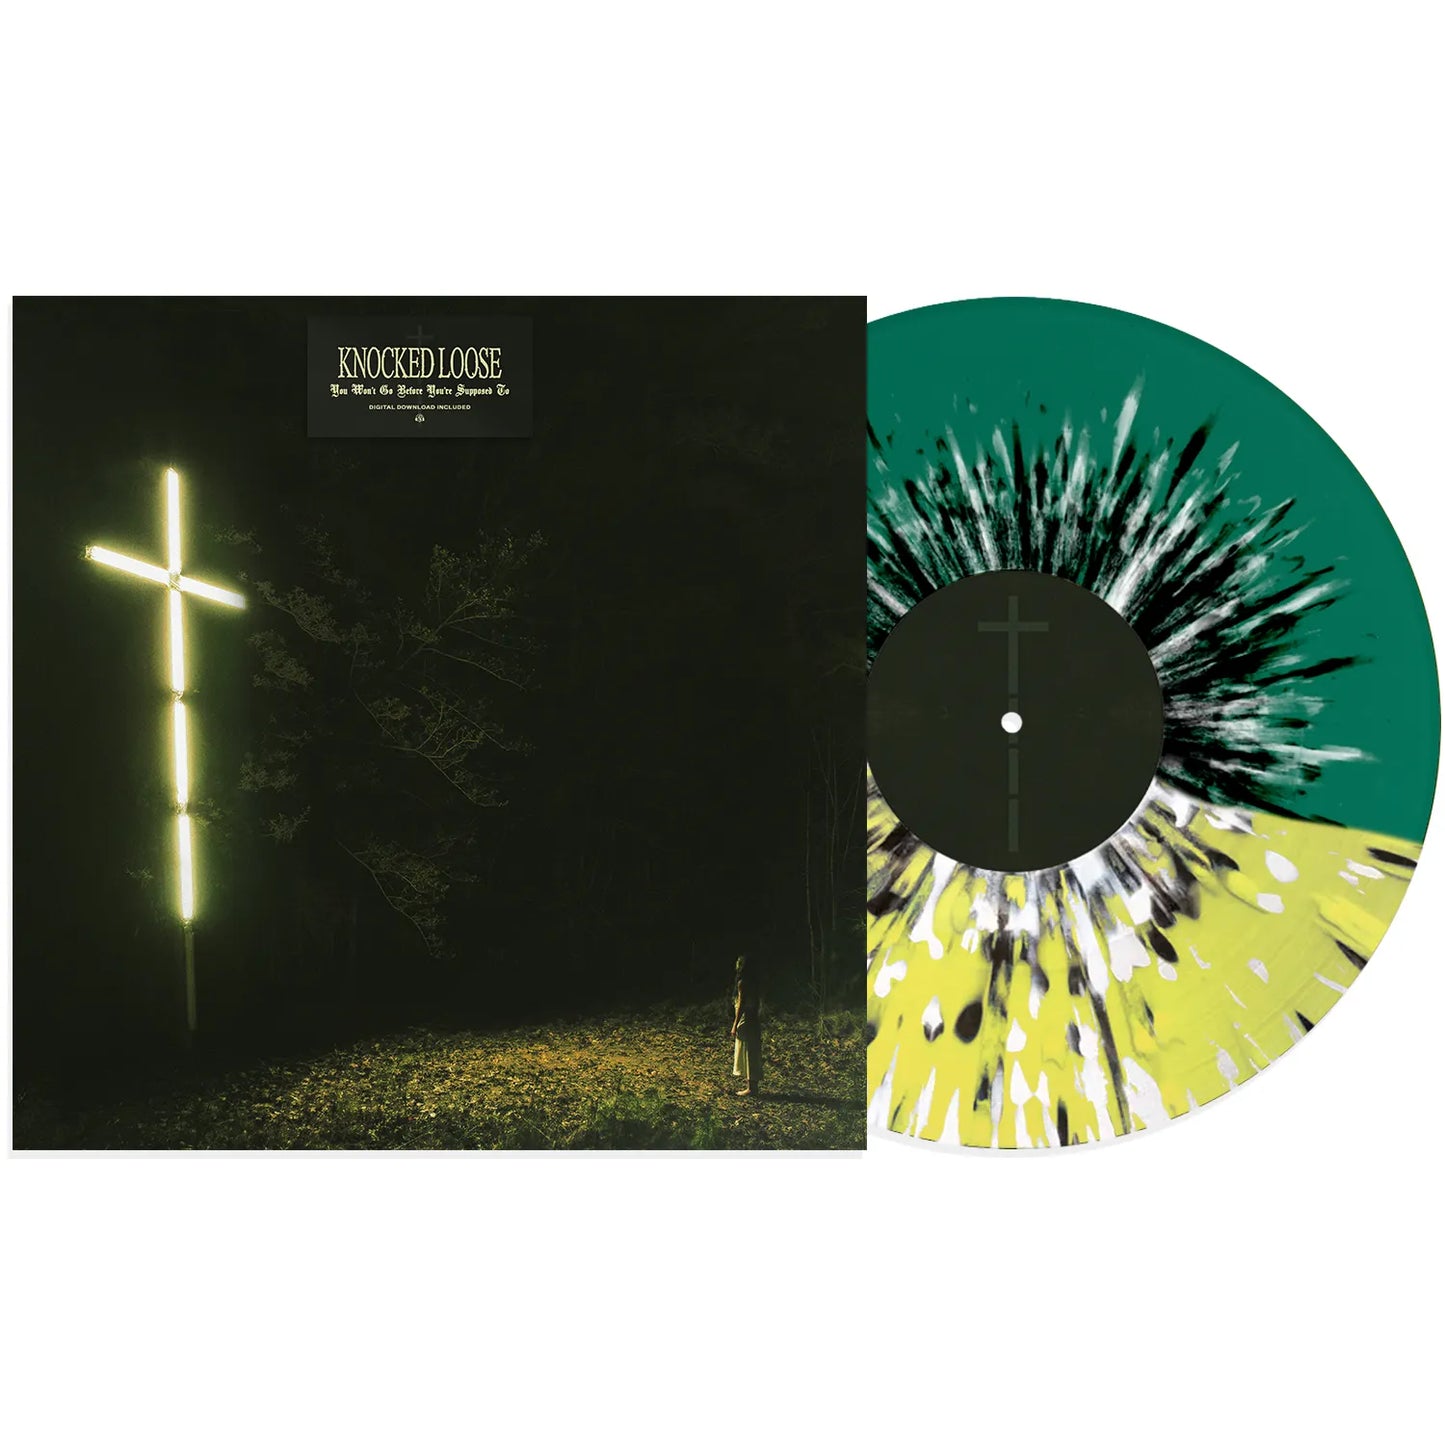 Knocked Loose "You Won't Go Before You're Supposed To" LP (Indie Exclusive Half Green/Half Yellow w/ Black & White Splatter)